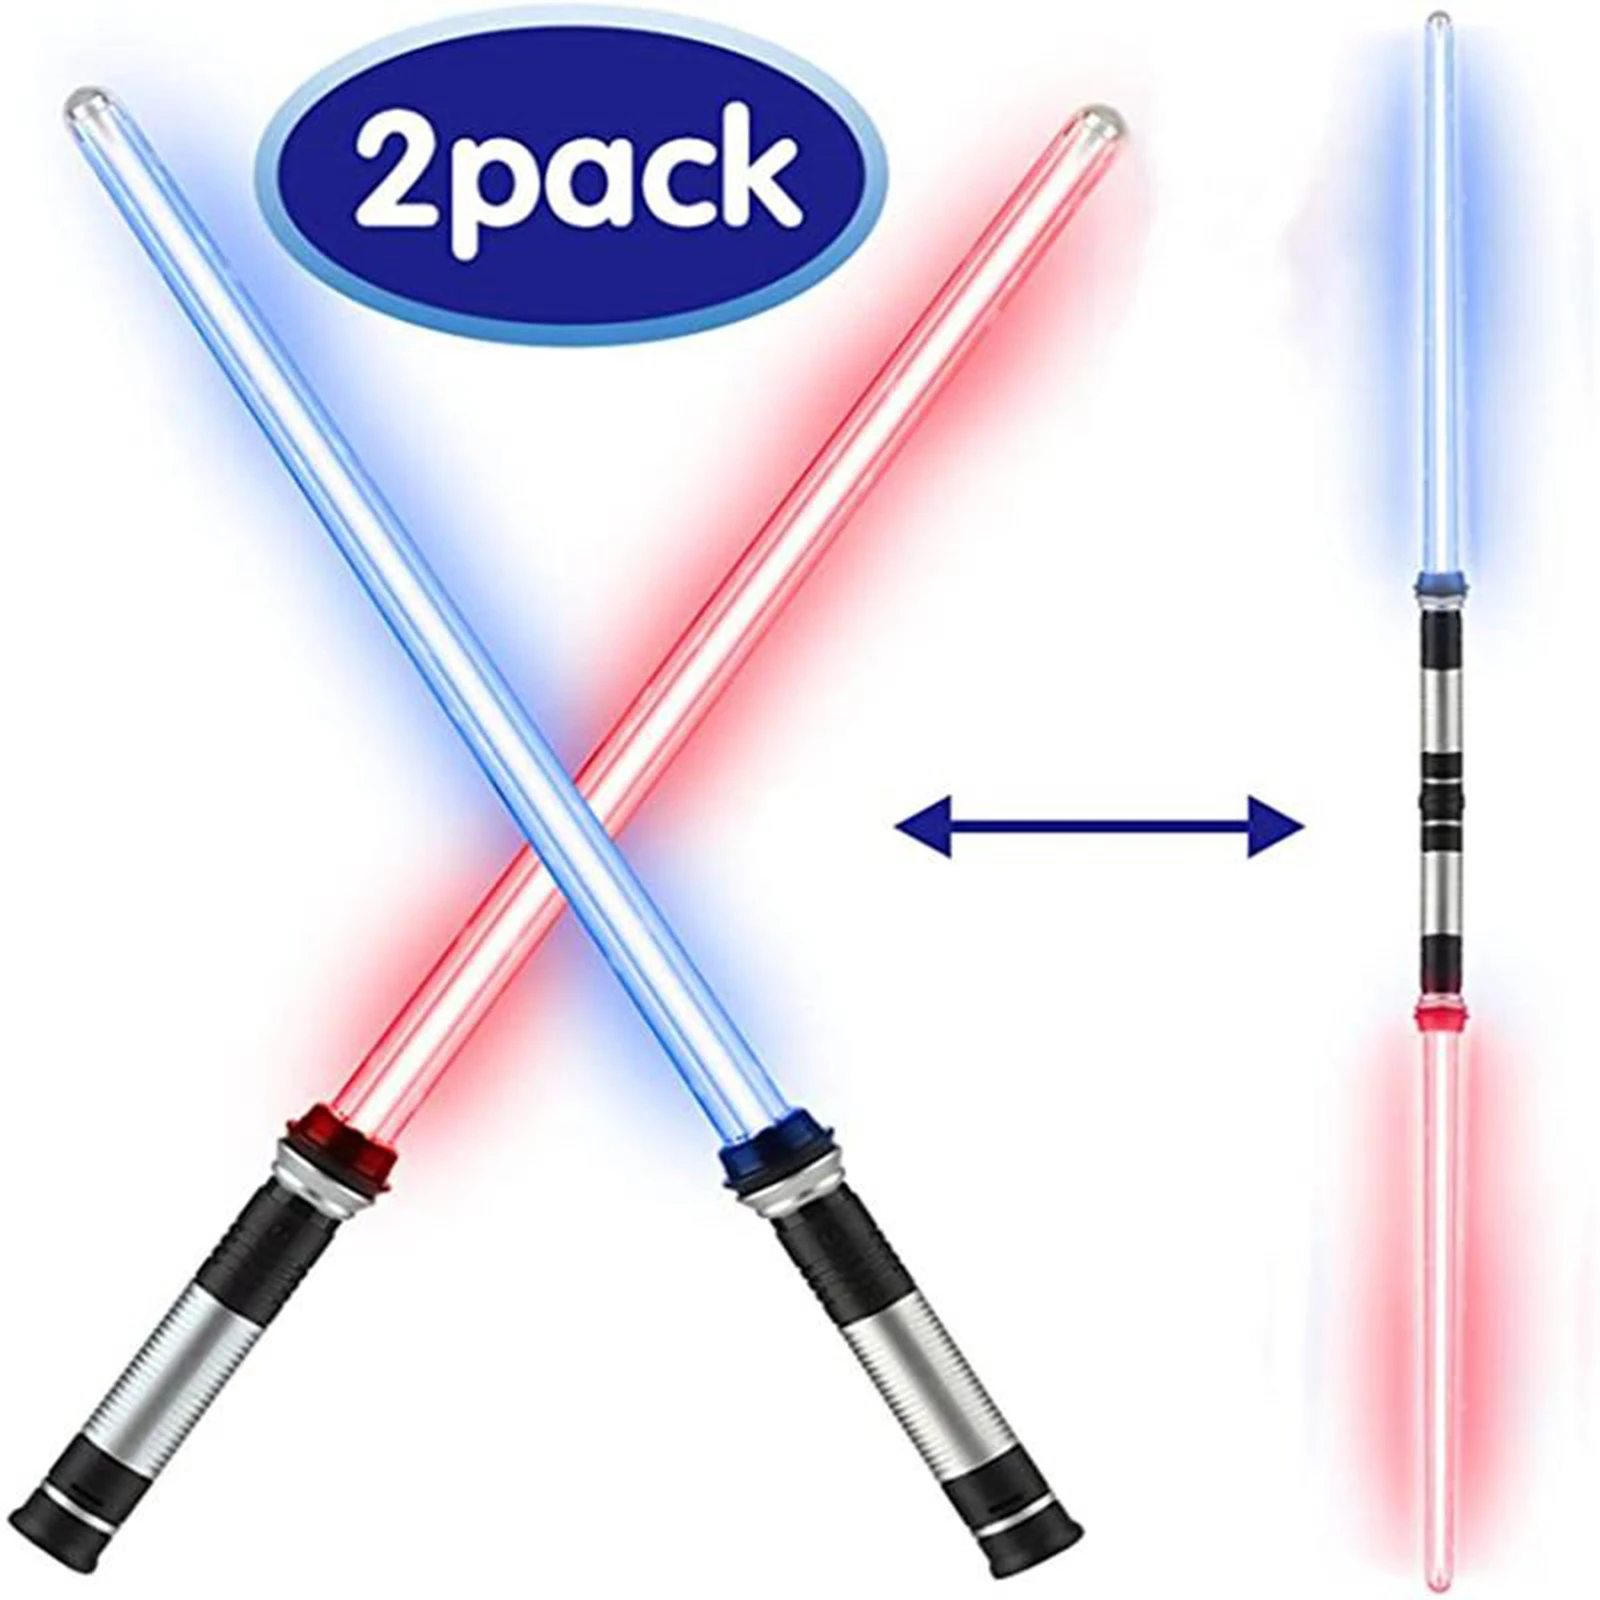 Flashing Lightsaber LED Light Up Sword War Toy 7 colors Changing w/ Sound Gifts